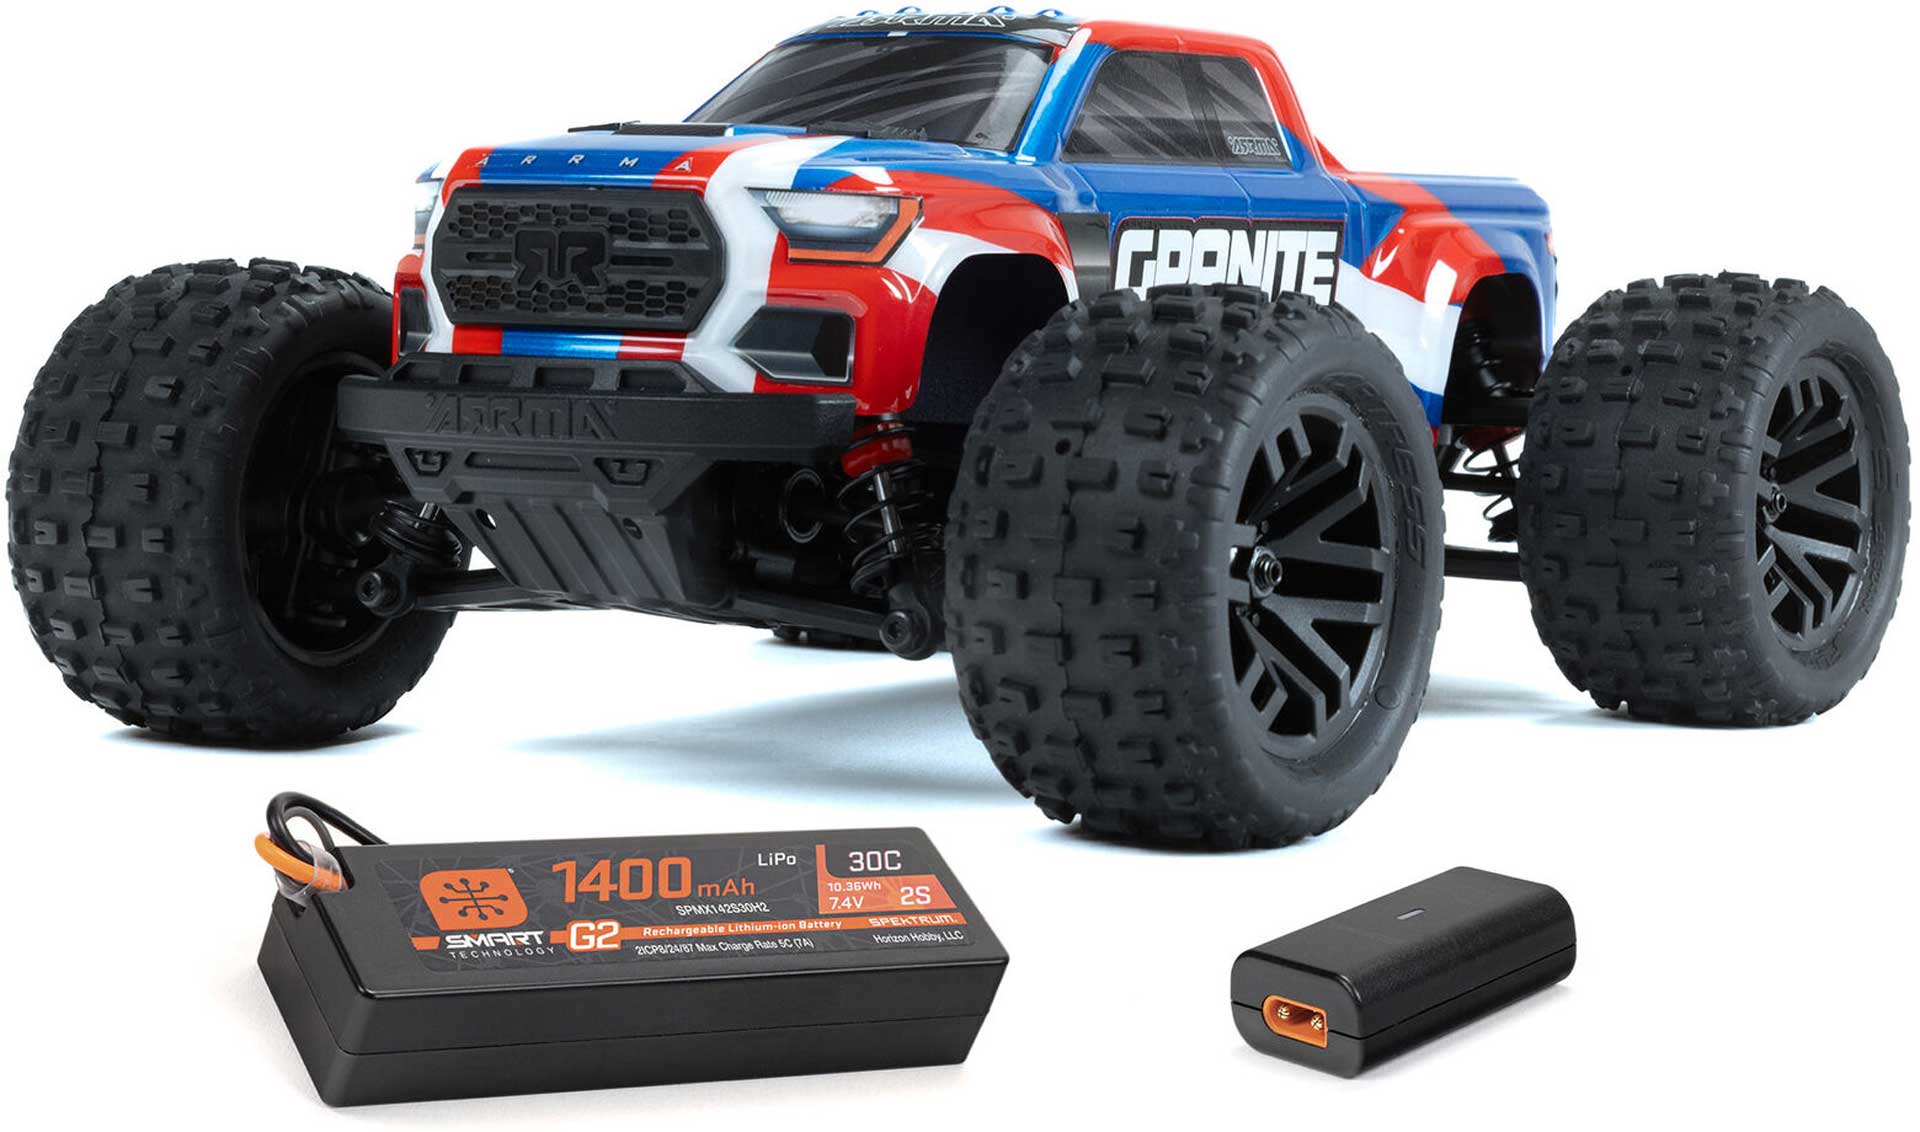 ARRMA GRANITE GROM 1/18 MEGA 380 Blue Brushed 4x4 Monster Truck RTR incl. battery and charger